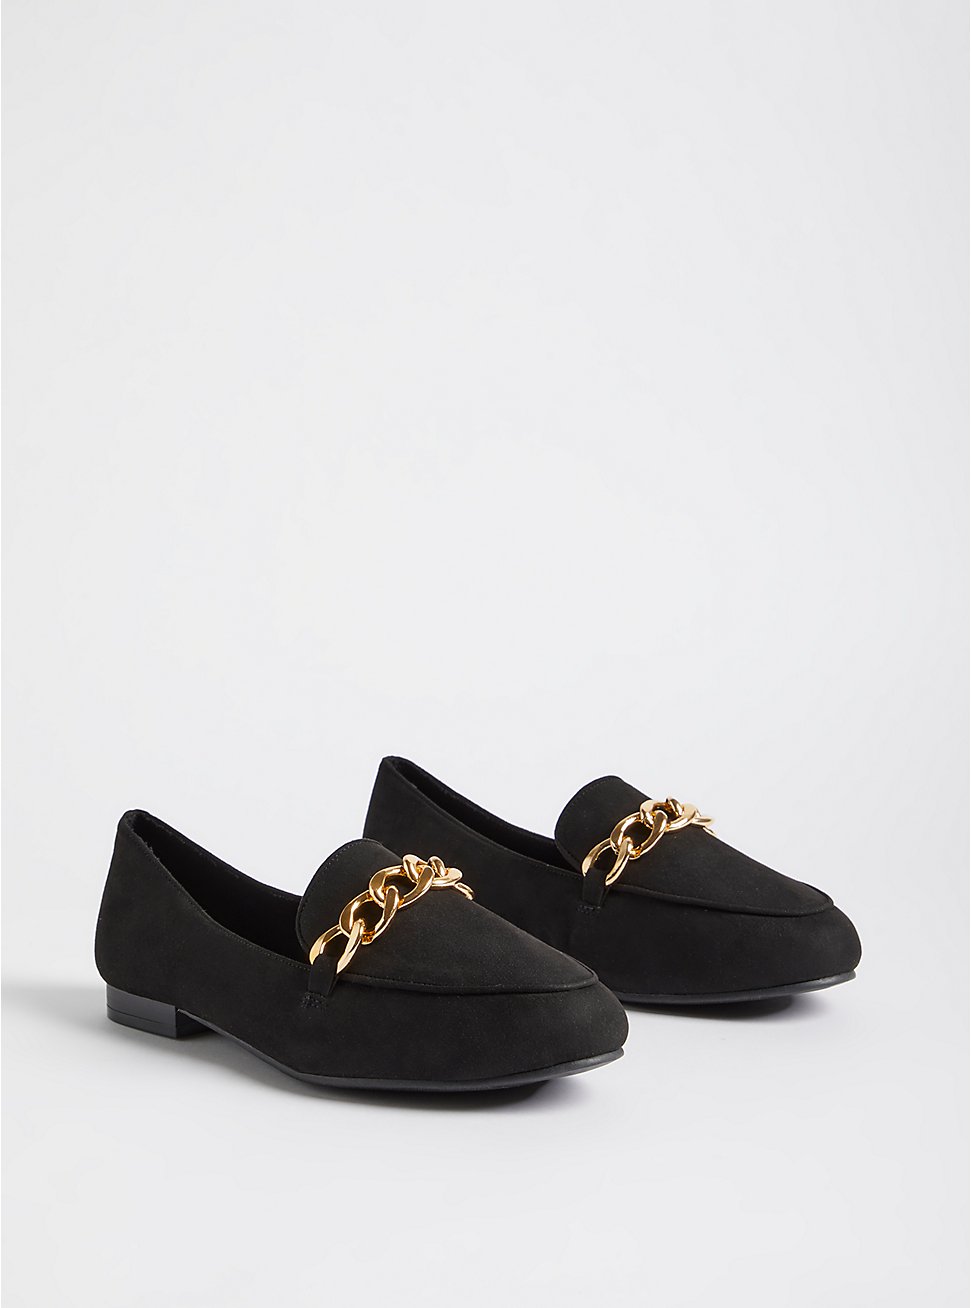 Chain Loafer - Faux Suede Black (WW), BLACK, hi-res